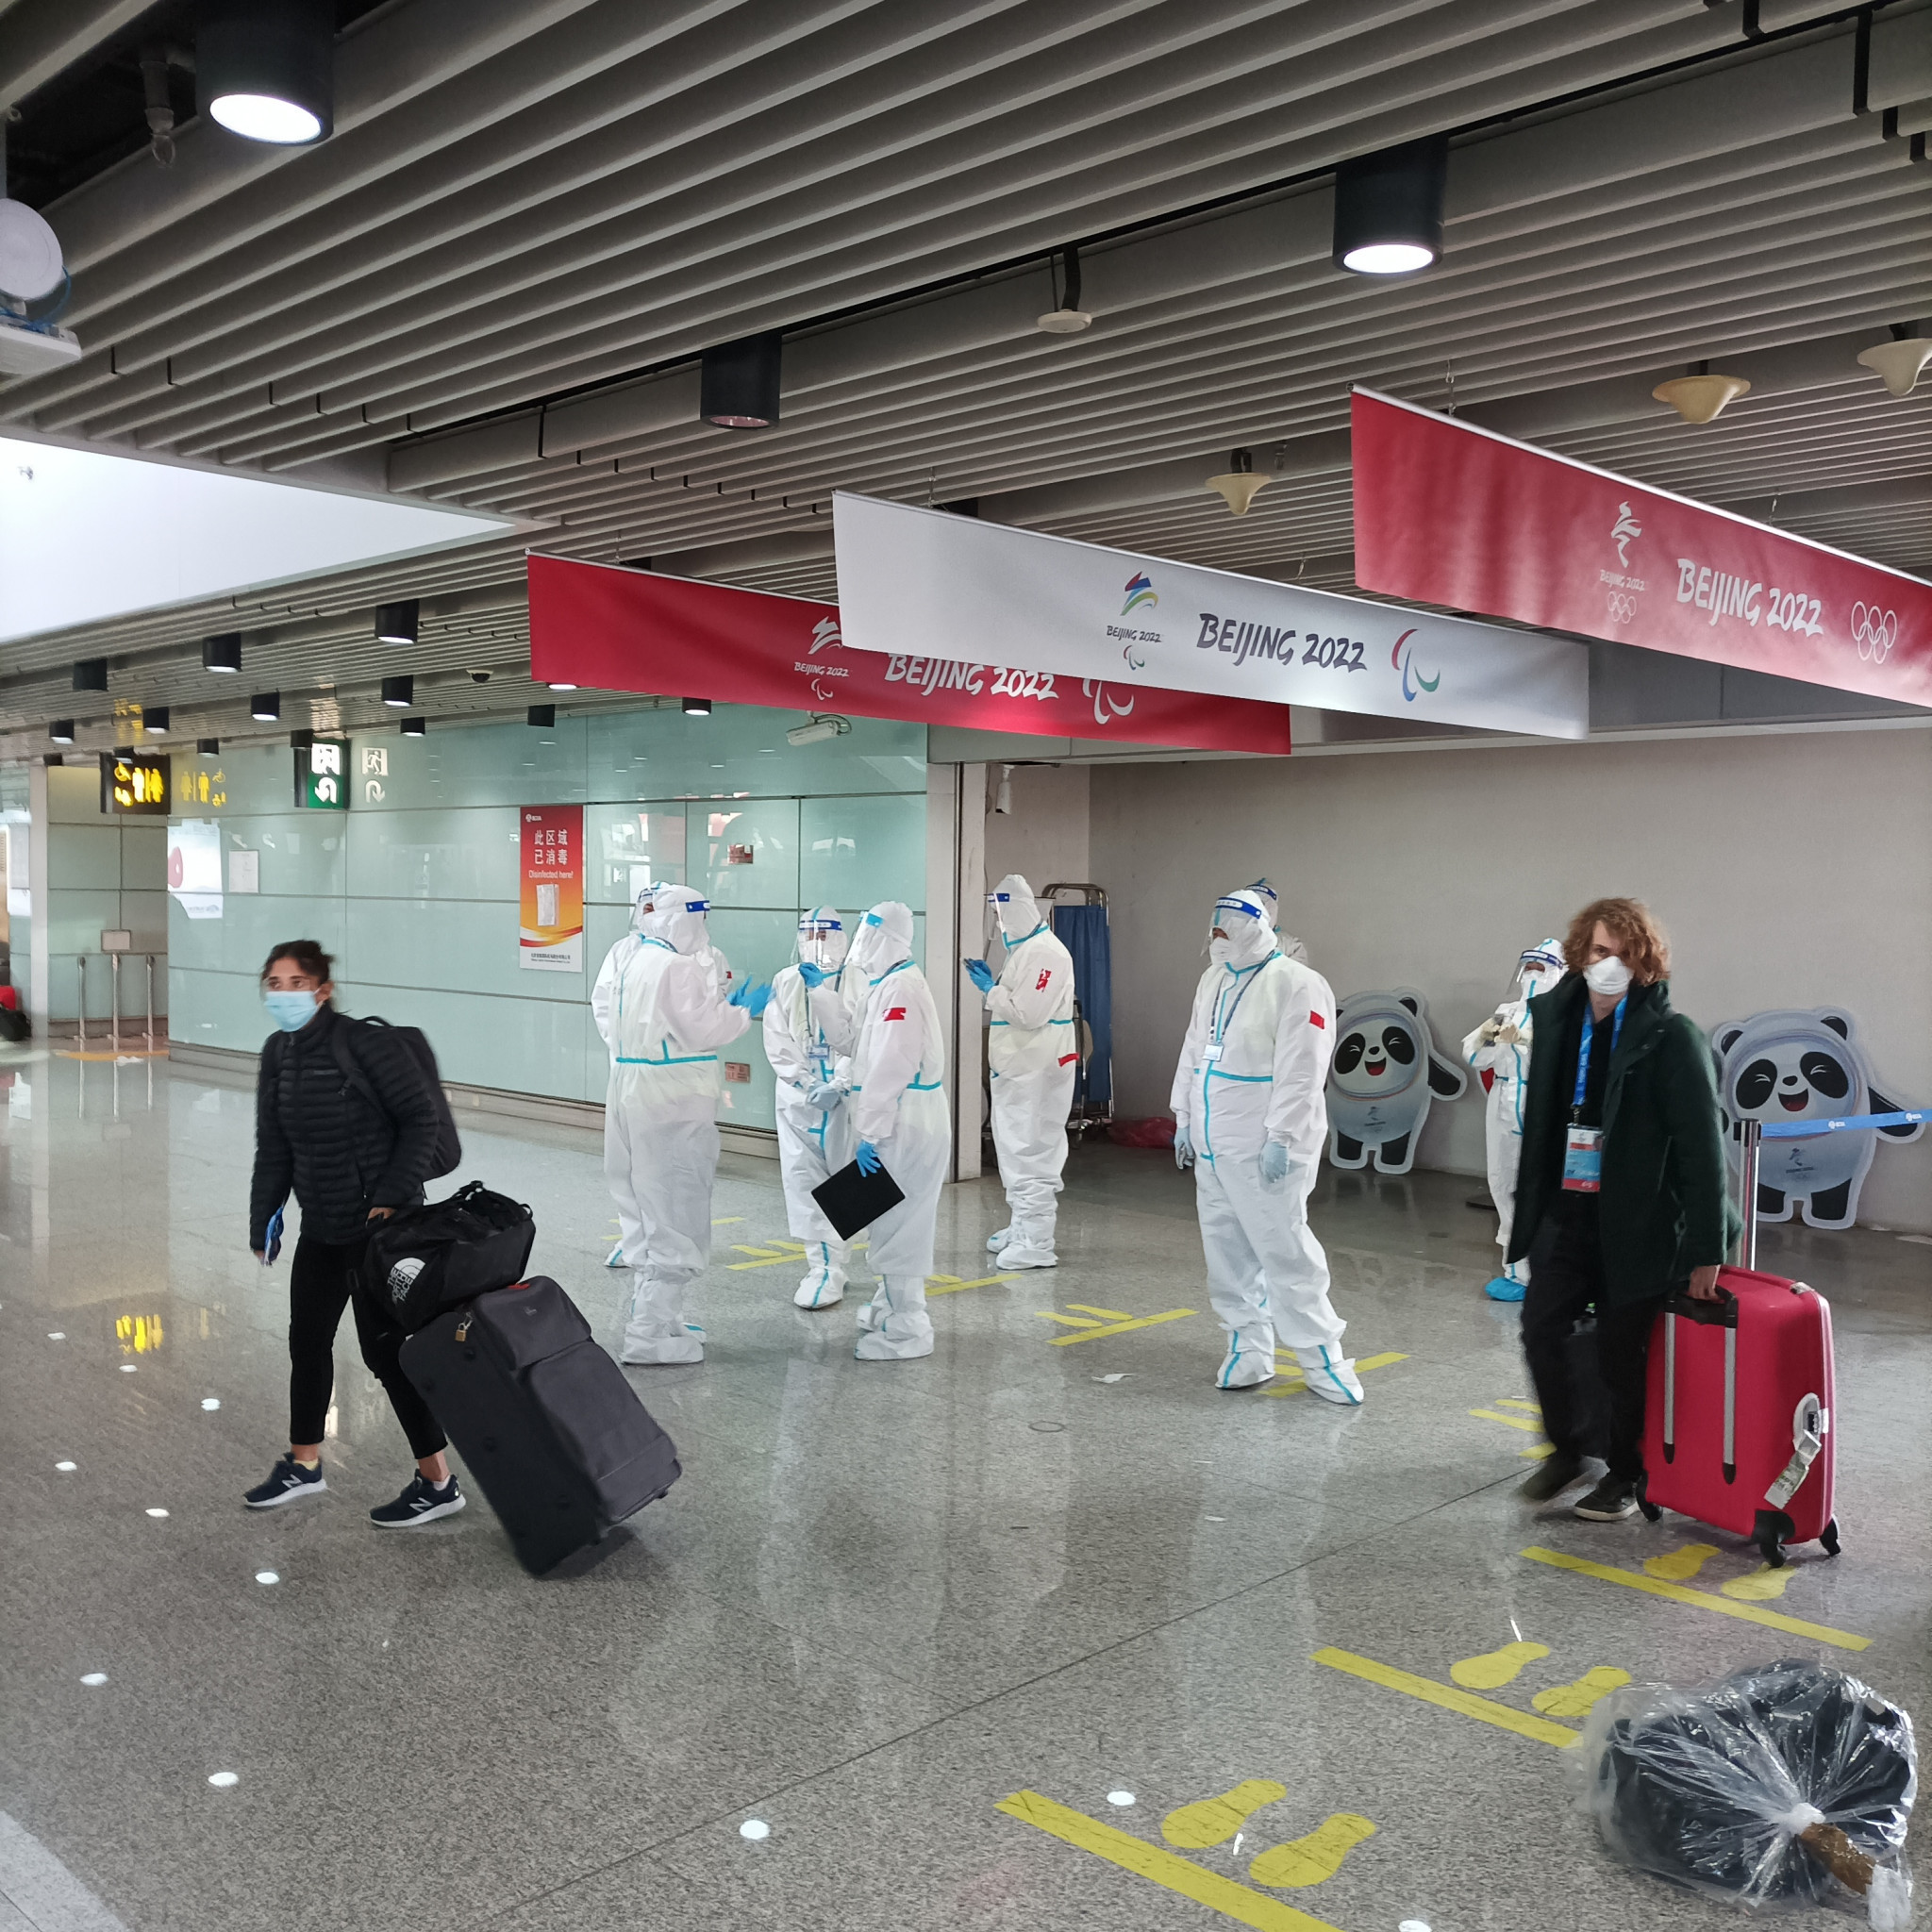 Welcome to Beijing, airport staff wore Hazmat suits as they welcomed visitors arriving for the 2022 Winter Olympic Games ©ITG